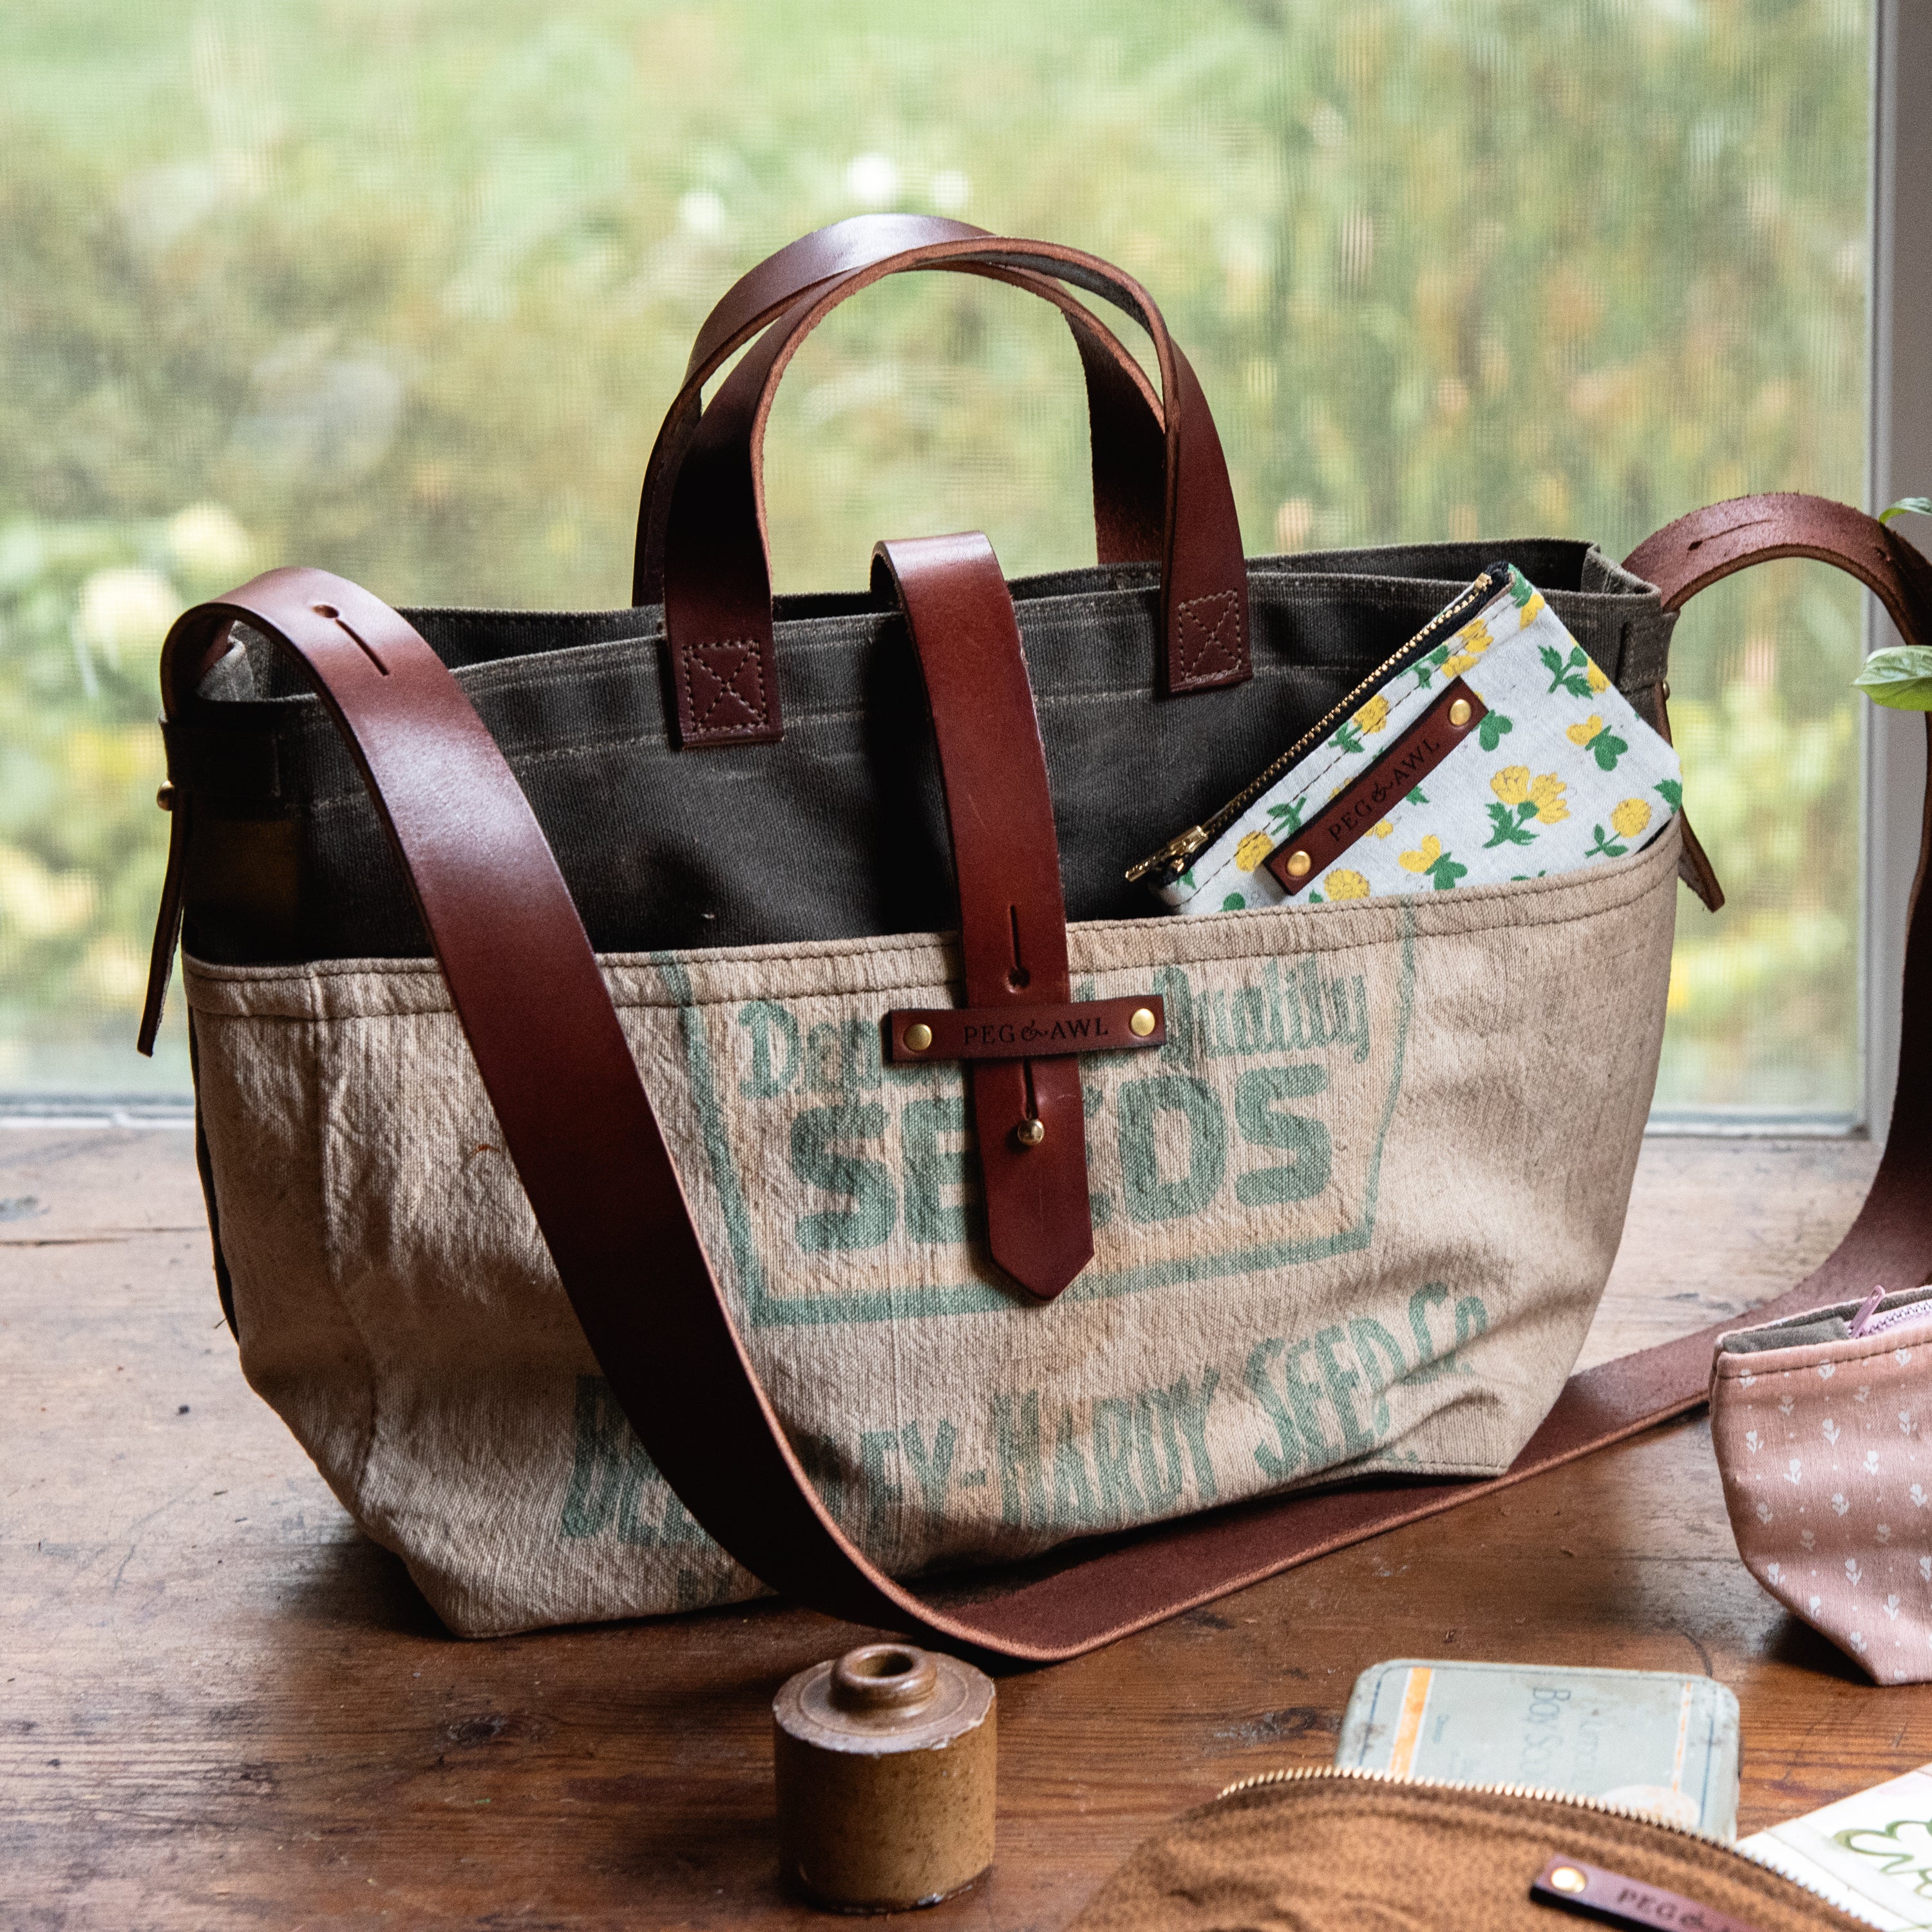 Standard Tote with Mid 1900s Seedsack: Hardy No. 2